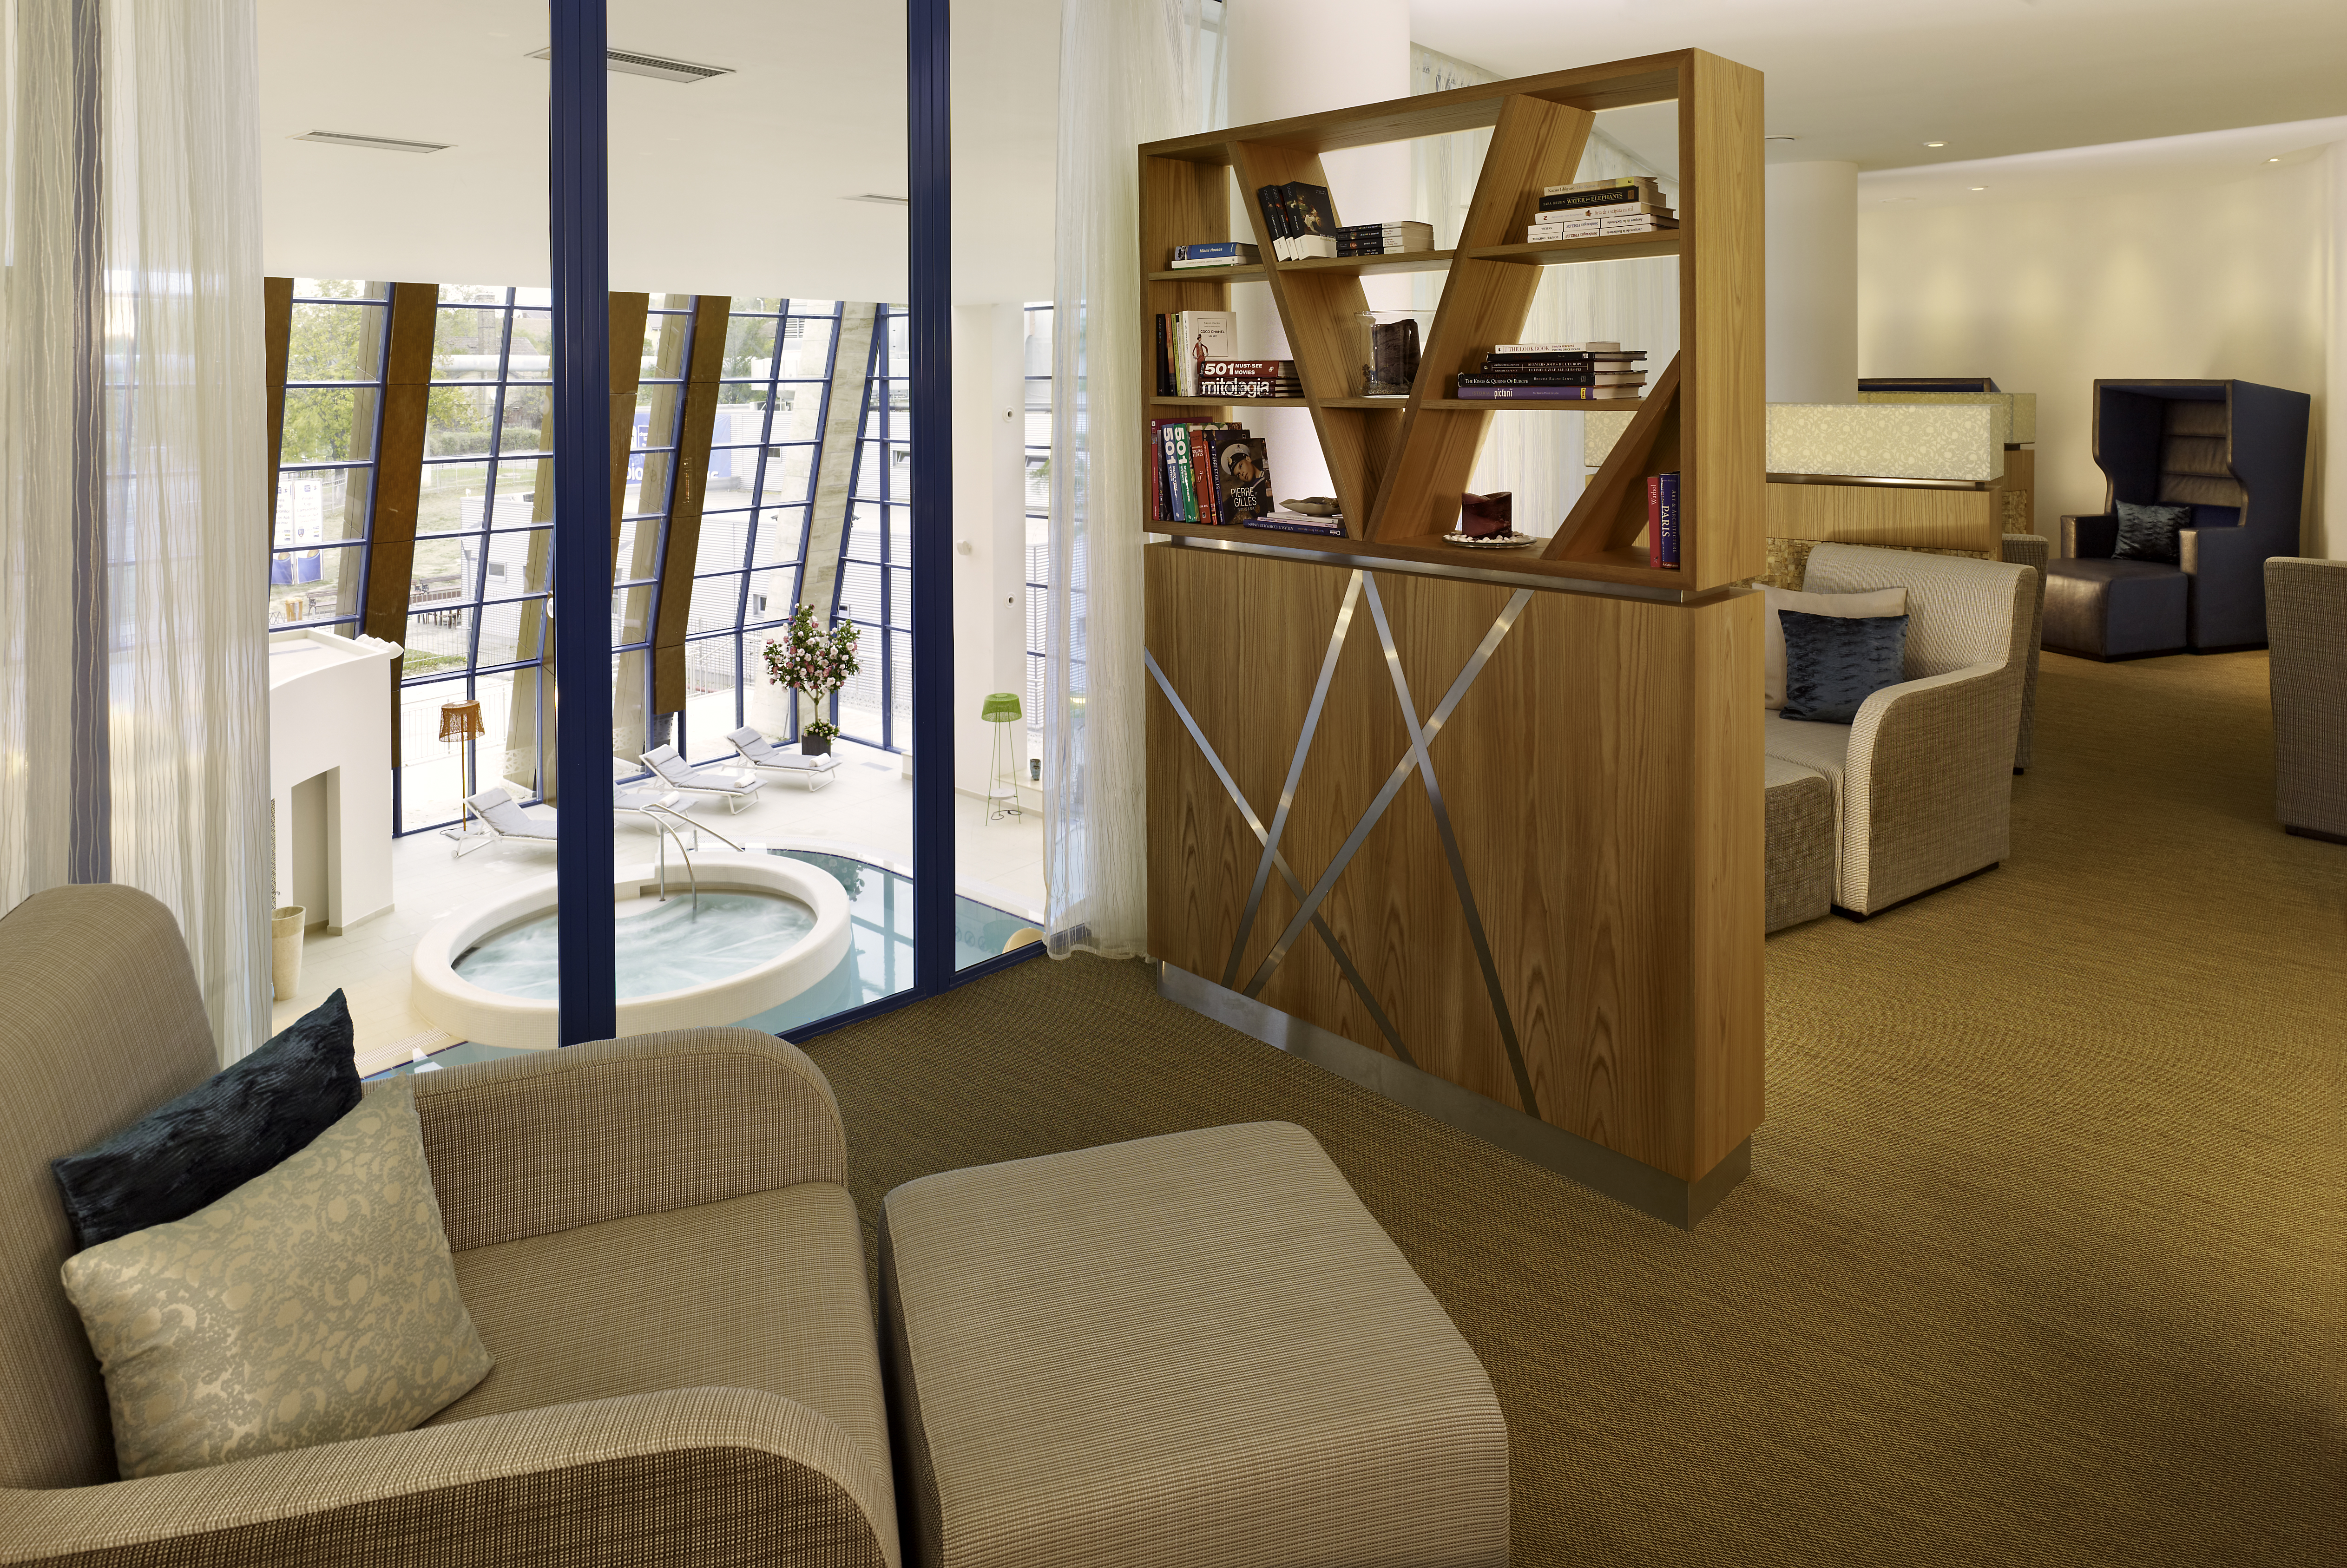 Soft Seating, Wood Shelves, and Large Window With Jot Tub View in Transition Lounge at Eforea Spa